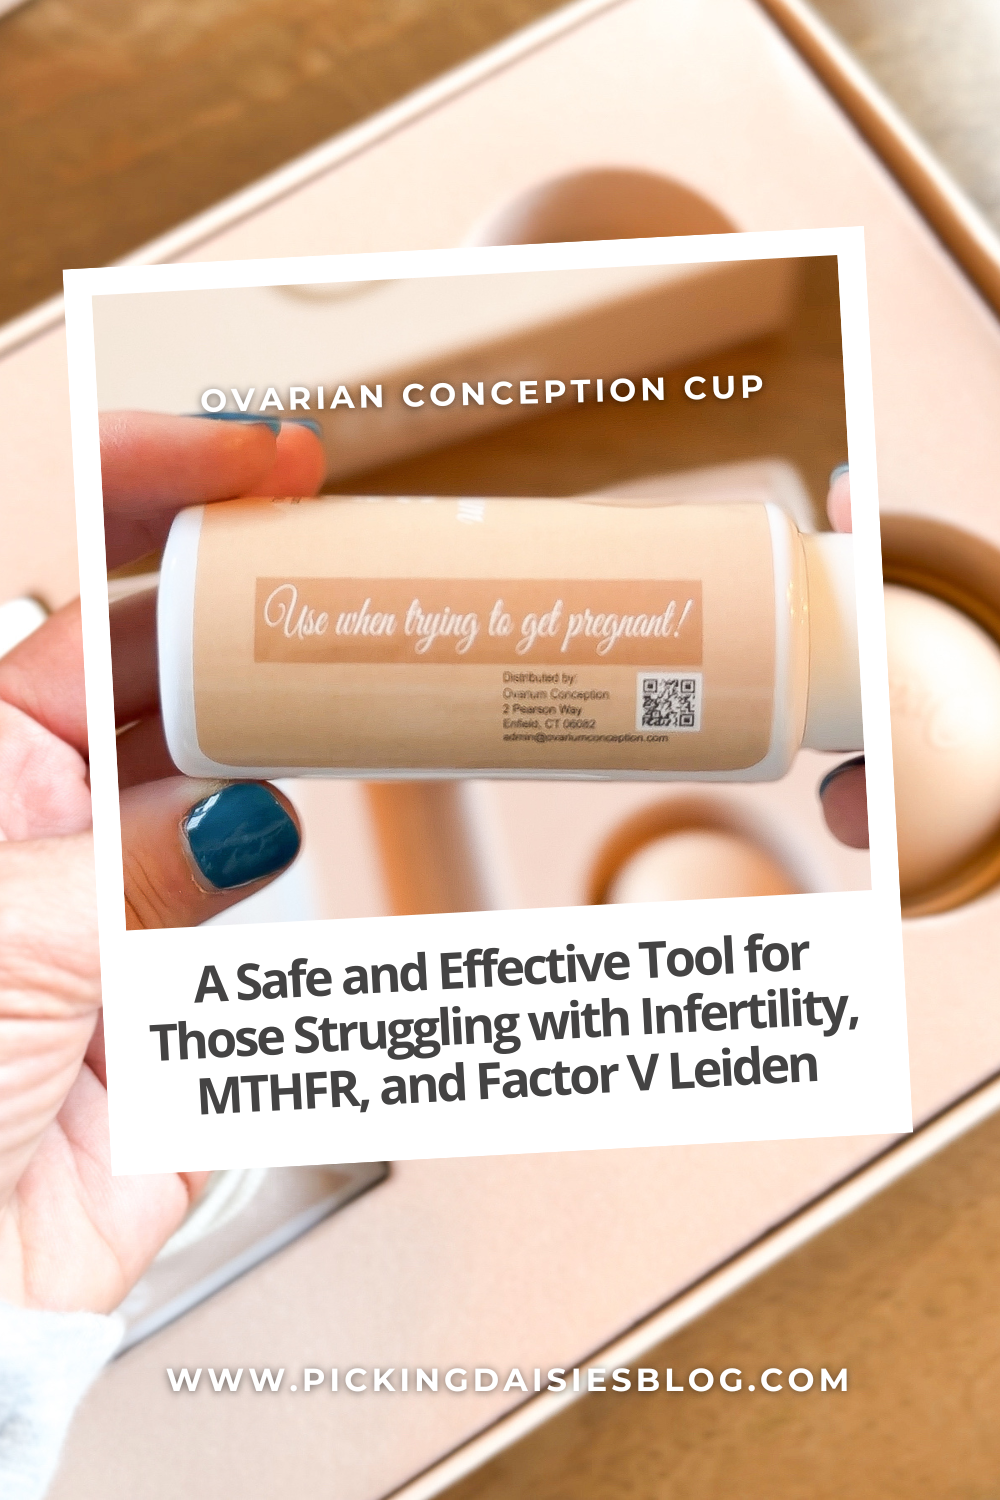 Ovarium Conception Cup: A Safe and Effective Tool for Those Struggling with Infertility, MTHFR, and Factor V Leiden